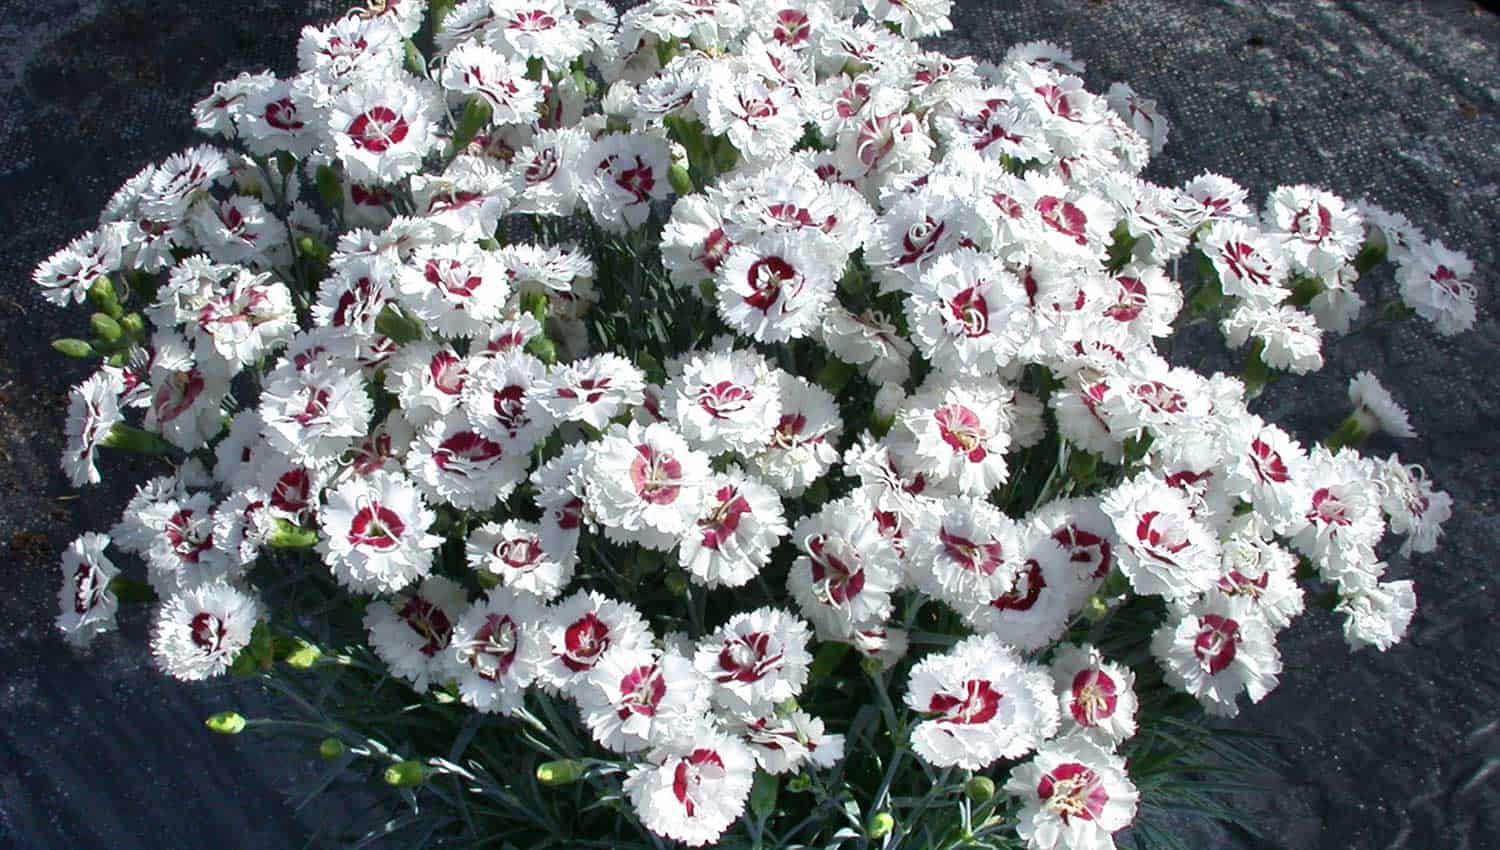 Pure white petaled blooms with red centers fill the frame of a plant called Coconut Surprise Dianthus